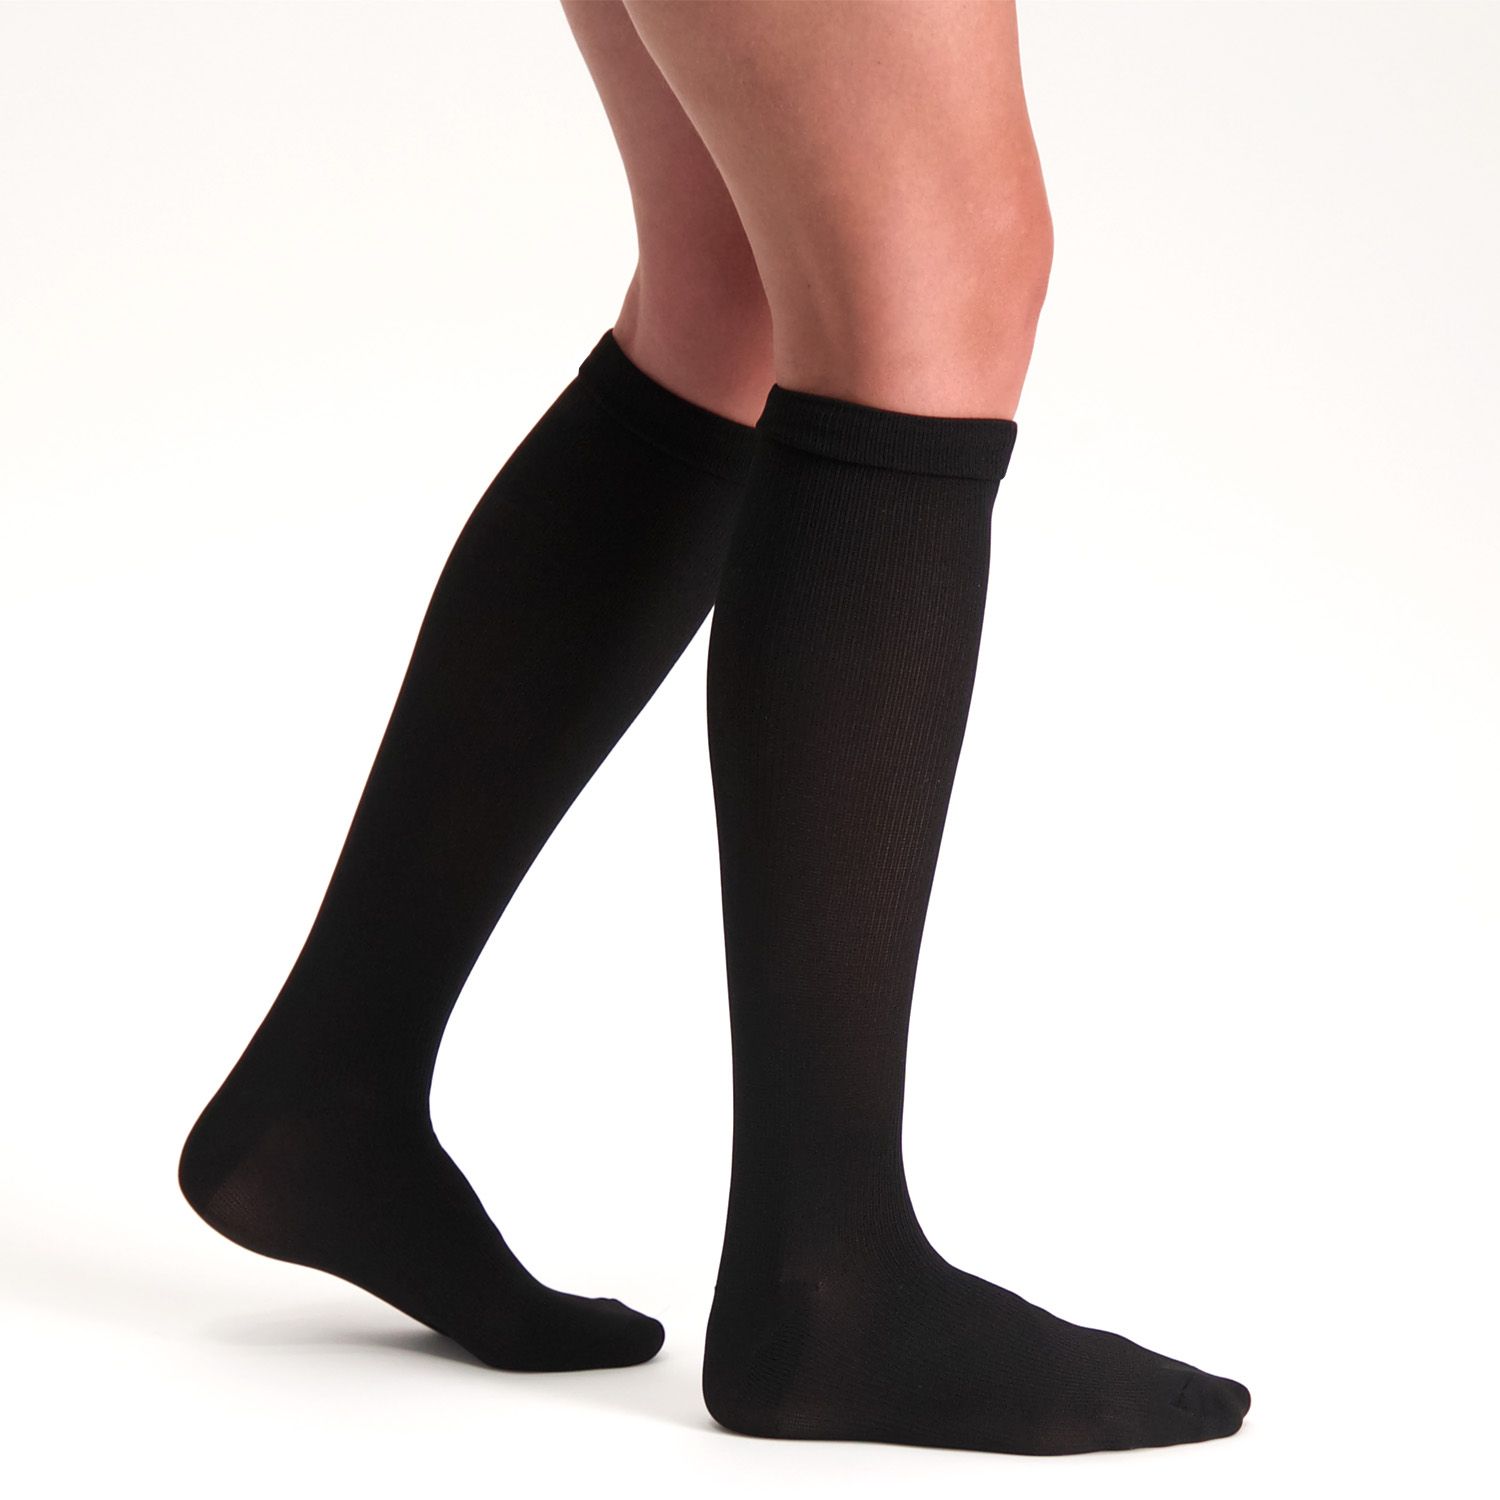 Support Stockings / Travel Stockings - Closed Toe